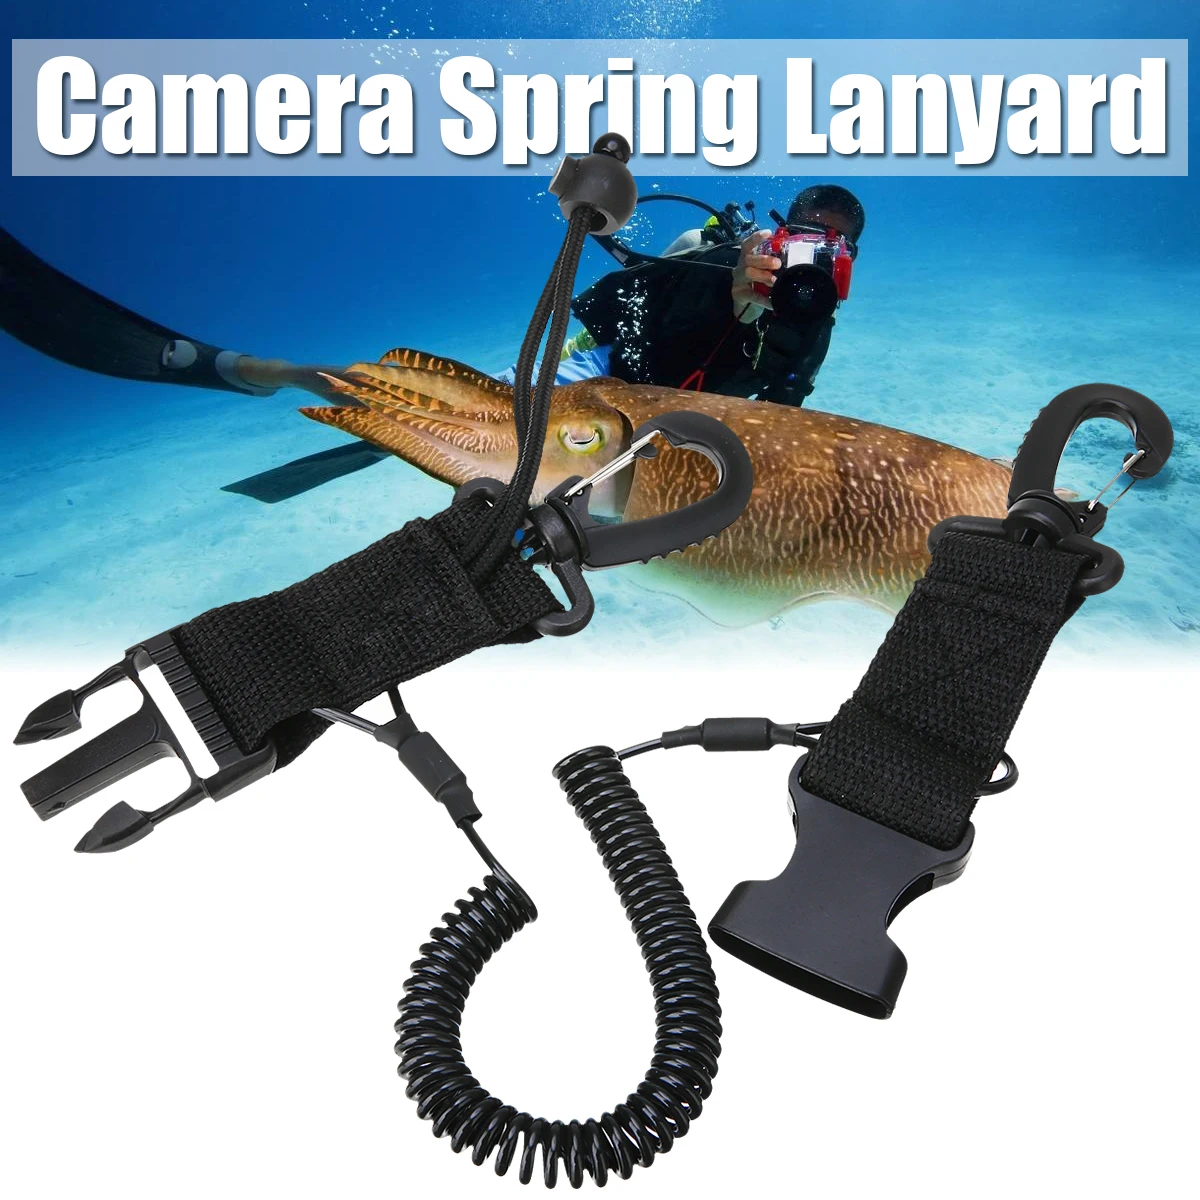 1Pc Lanyard Spring Coil Camera Scuba Diving Dive With Quick Release Buckle Clips For Underwater Dive Diving